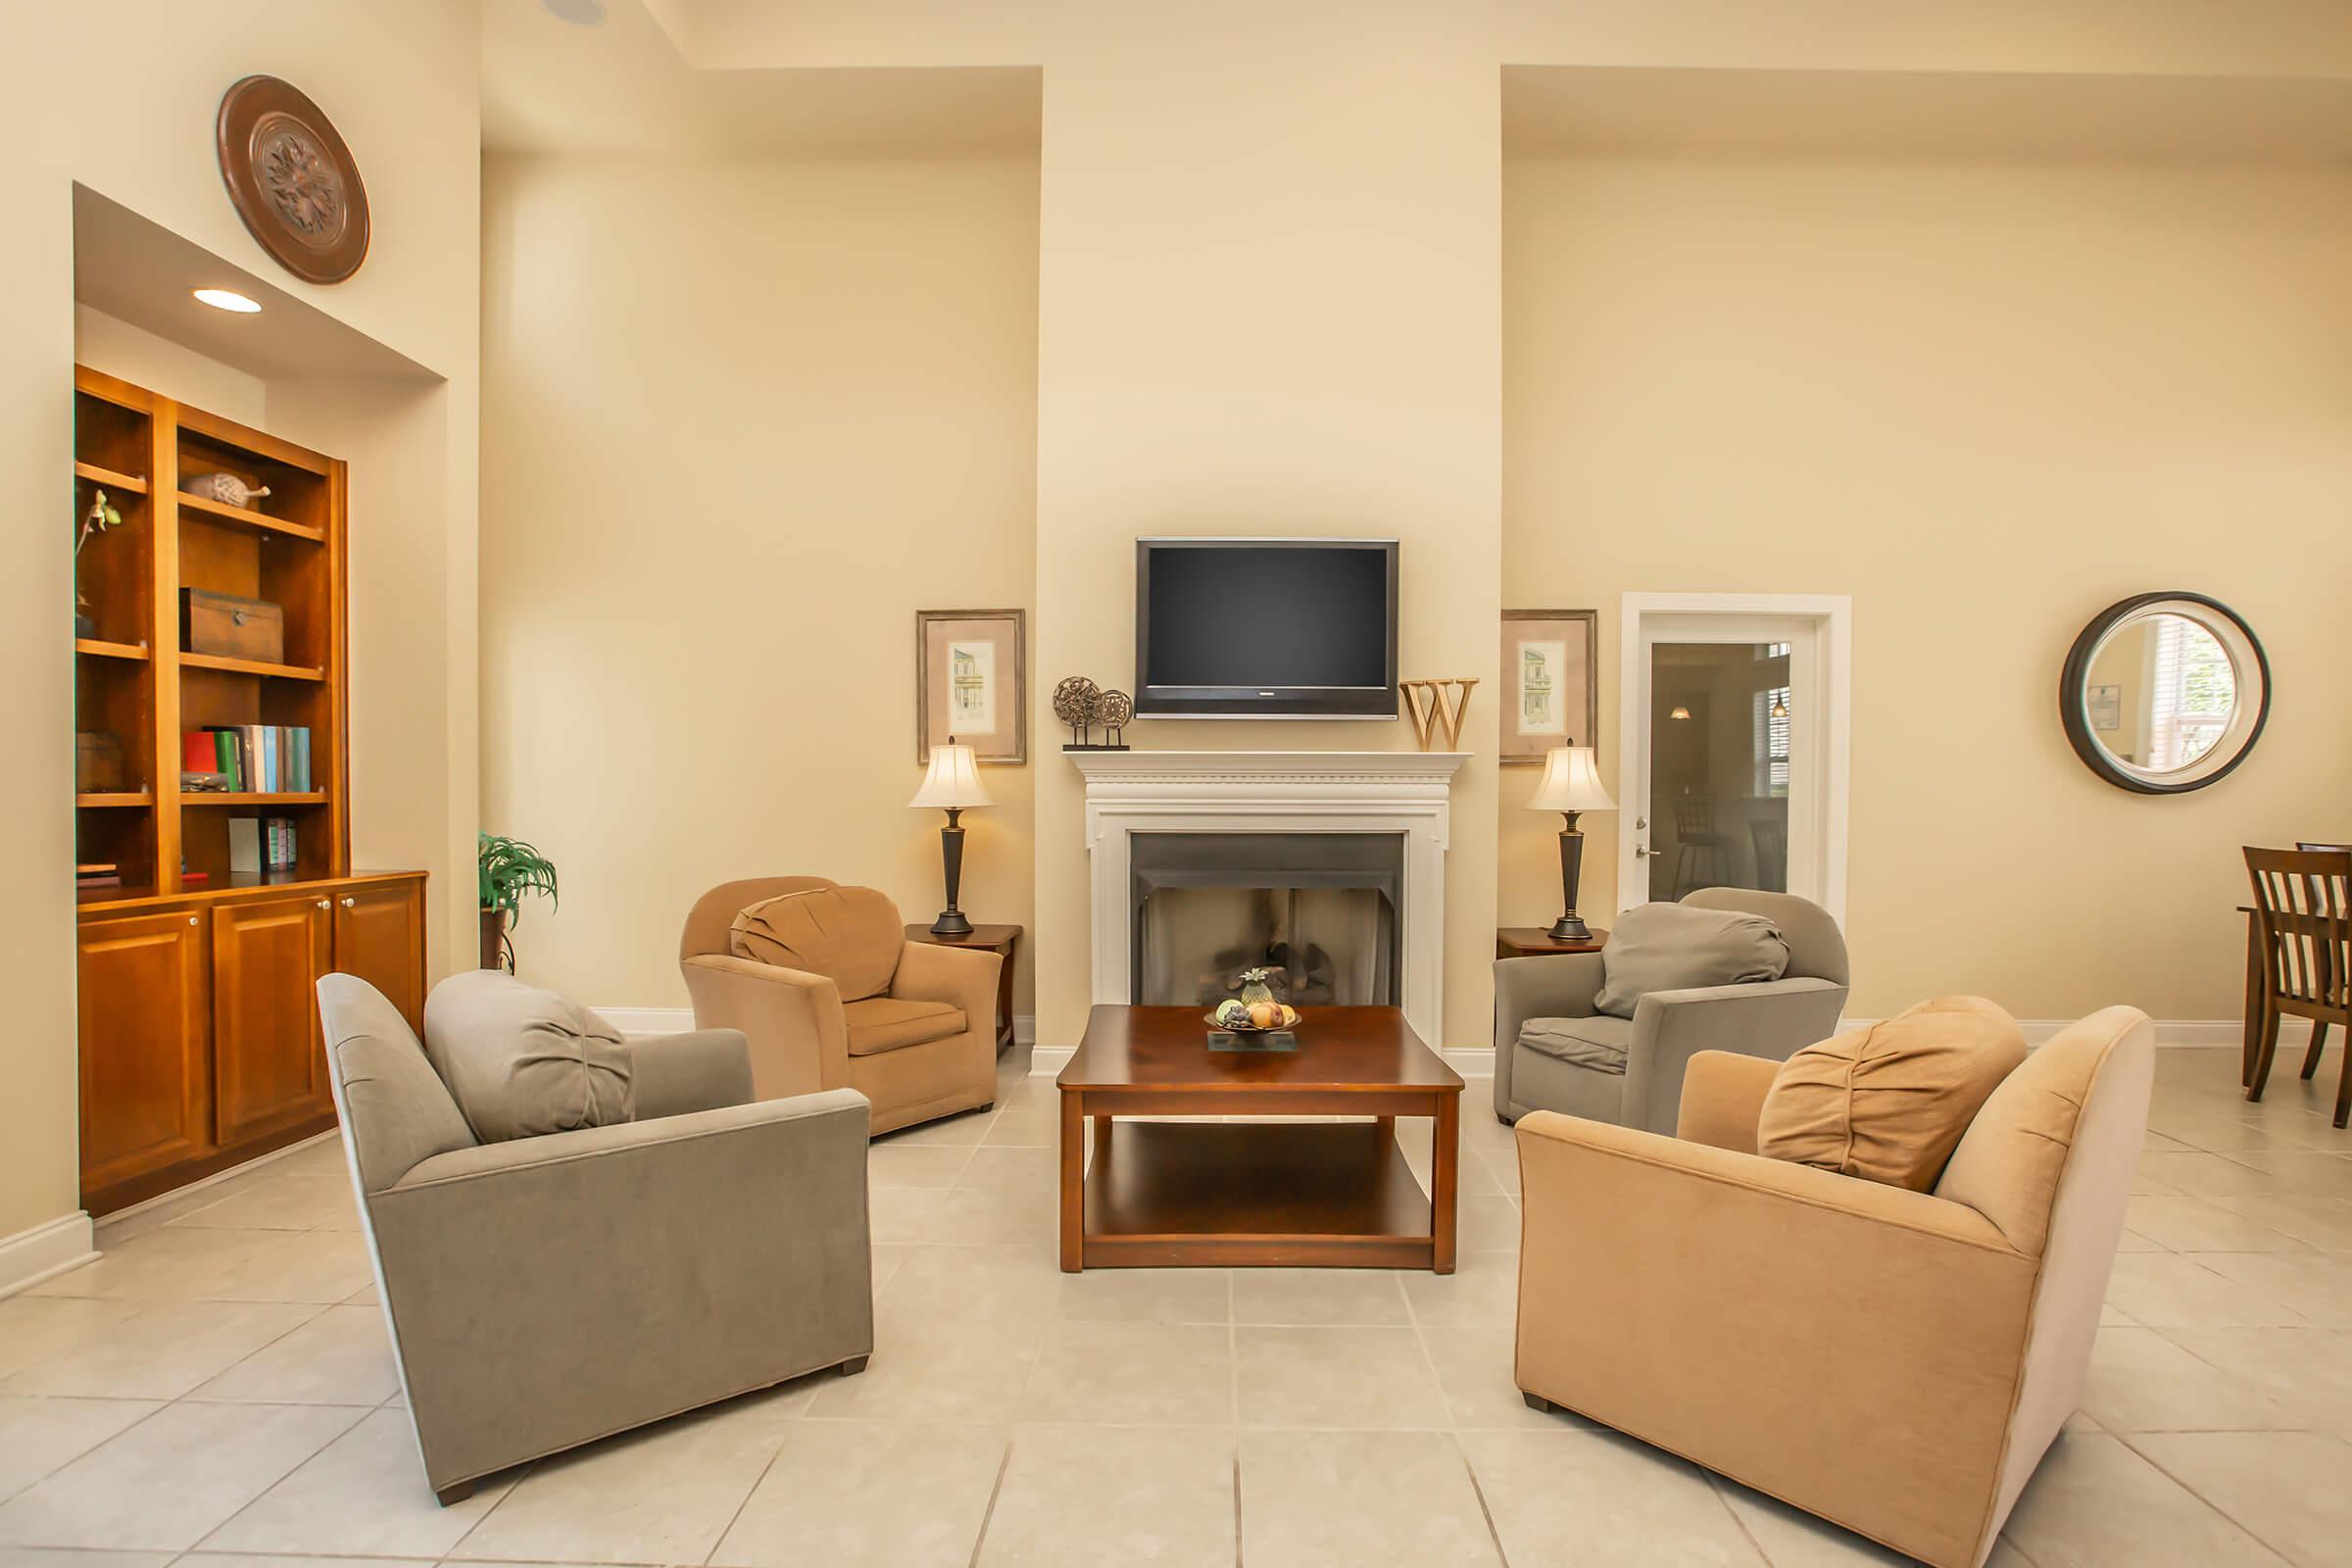 Perfect for every lifestyle at Whisper Creek in Rock Hill, SC.